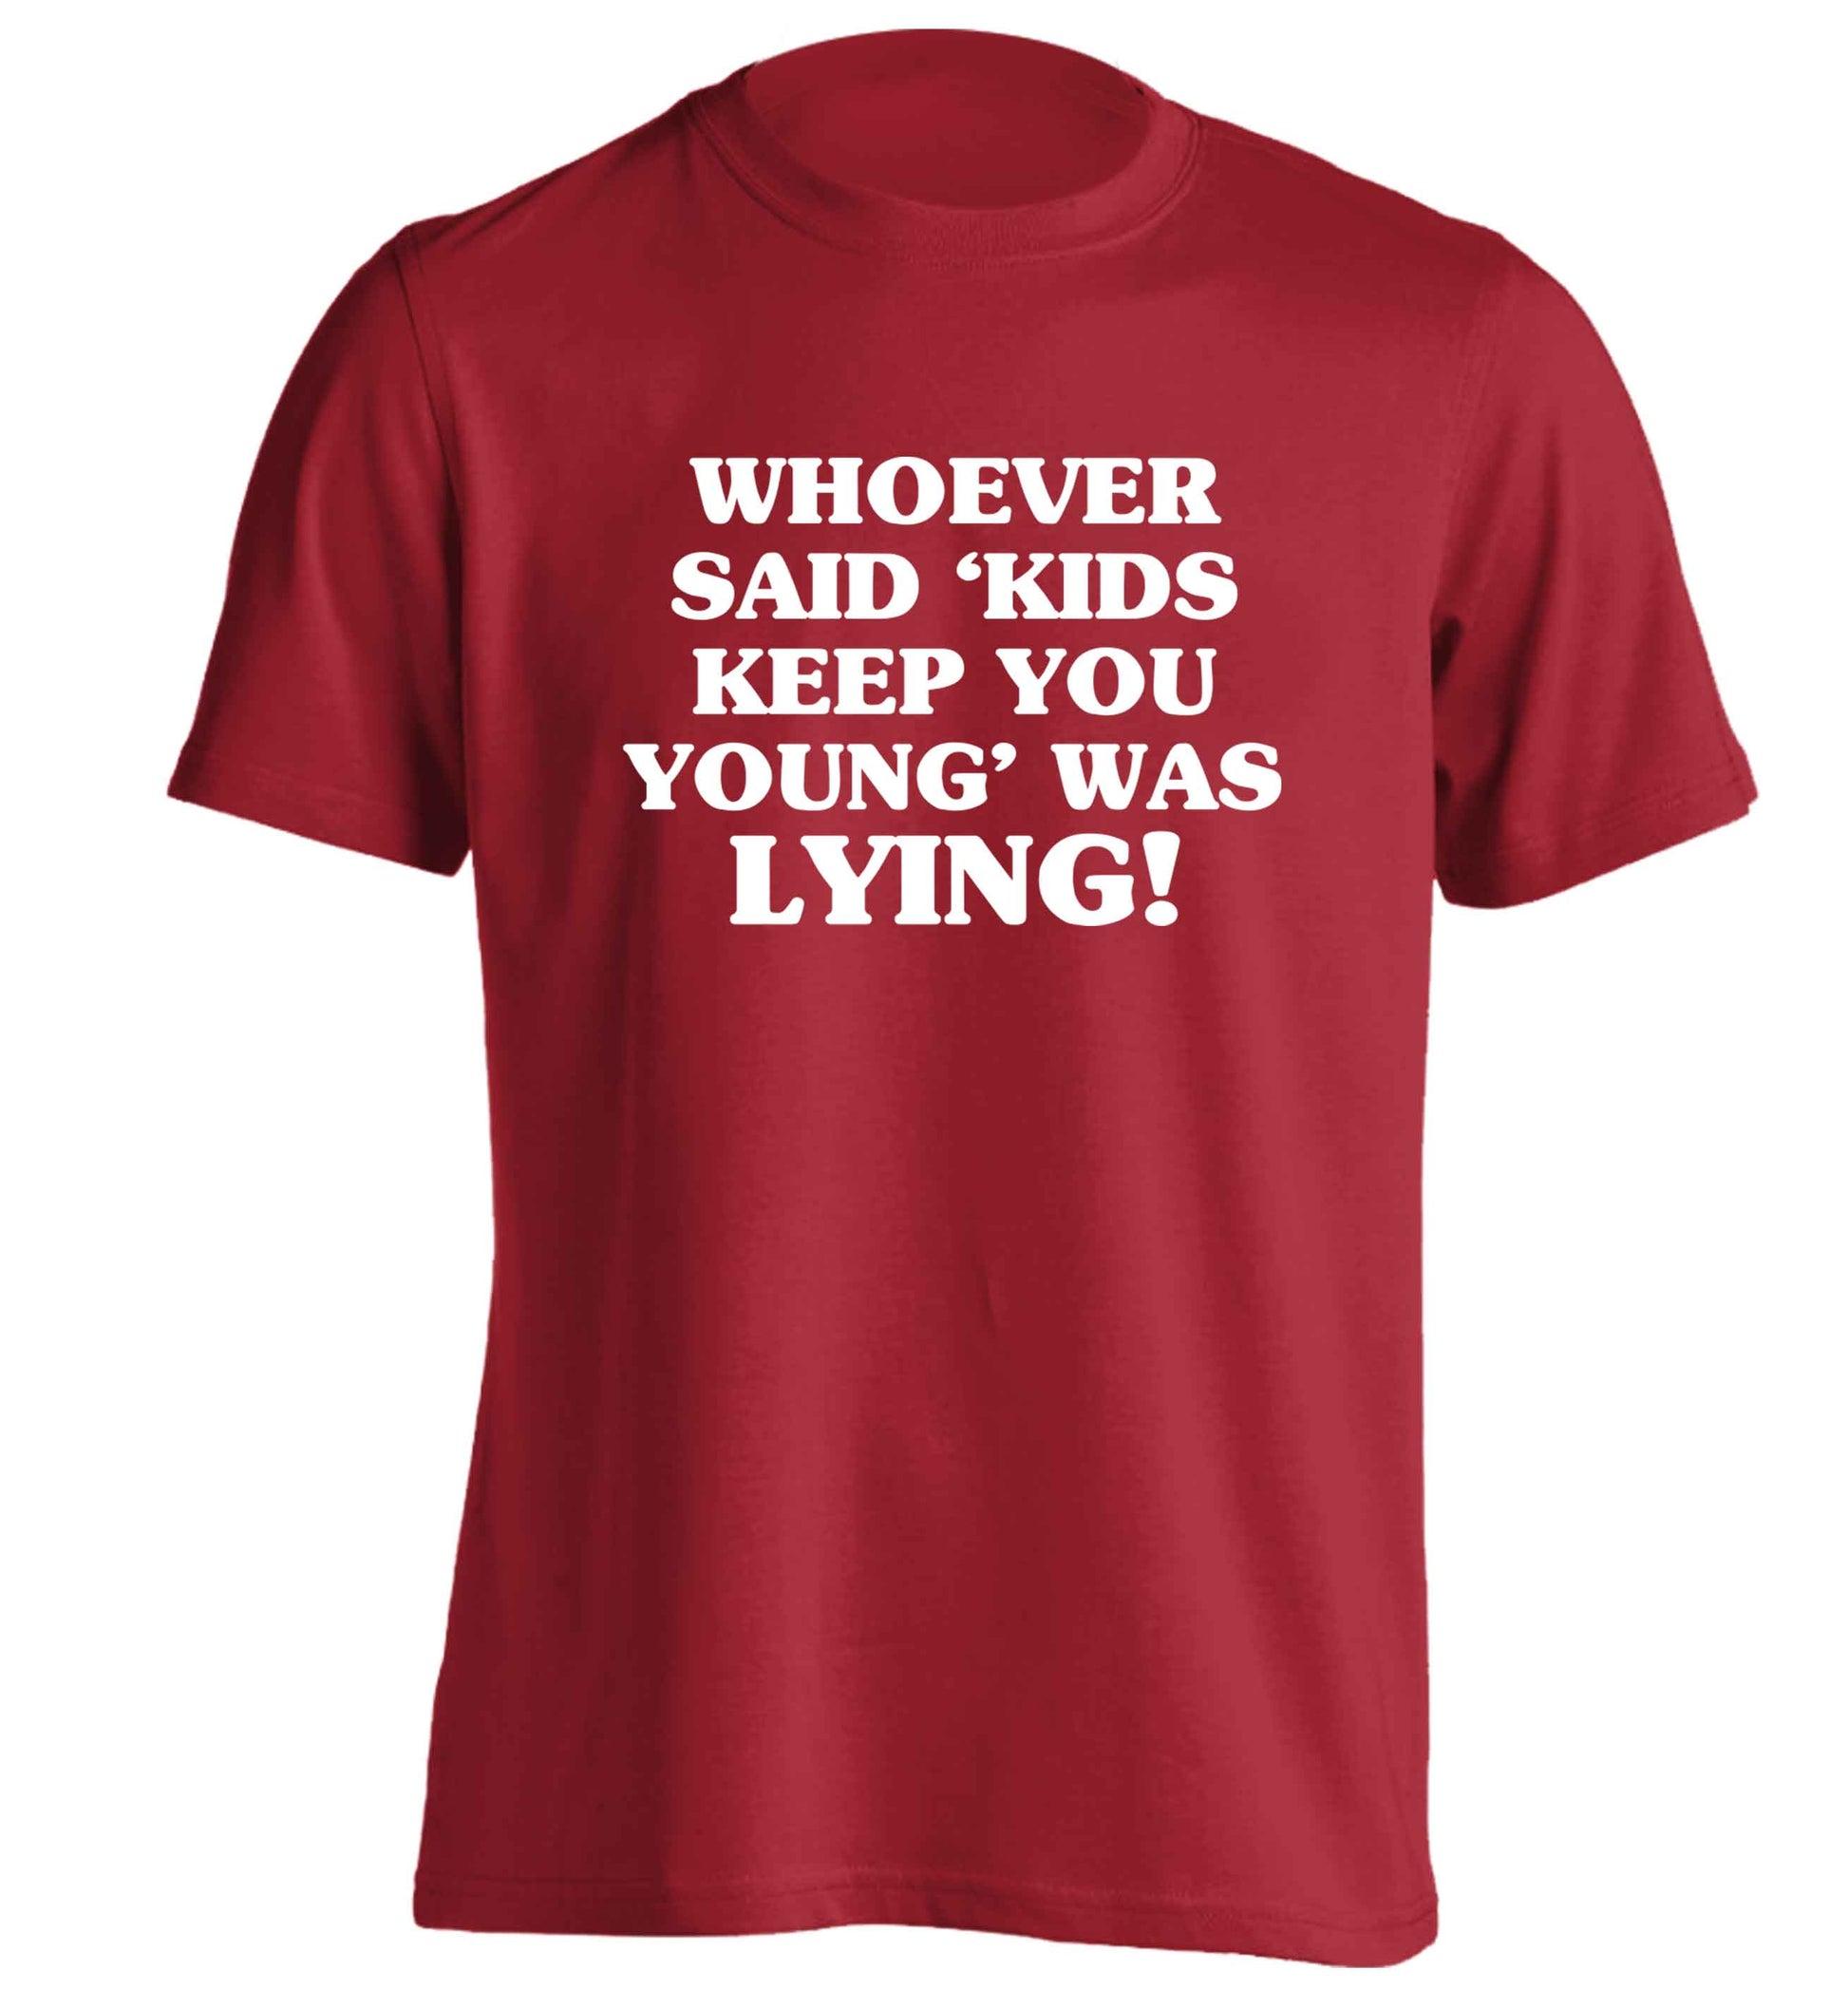 Whoever said 'kids keep you young' was lying! adults unisex red Tshirt 2XL